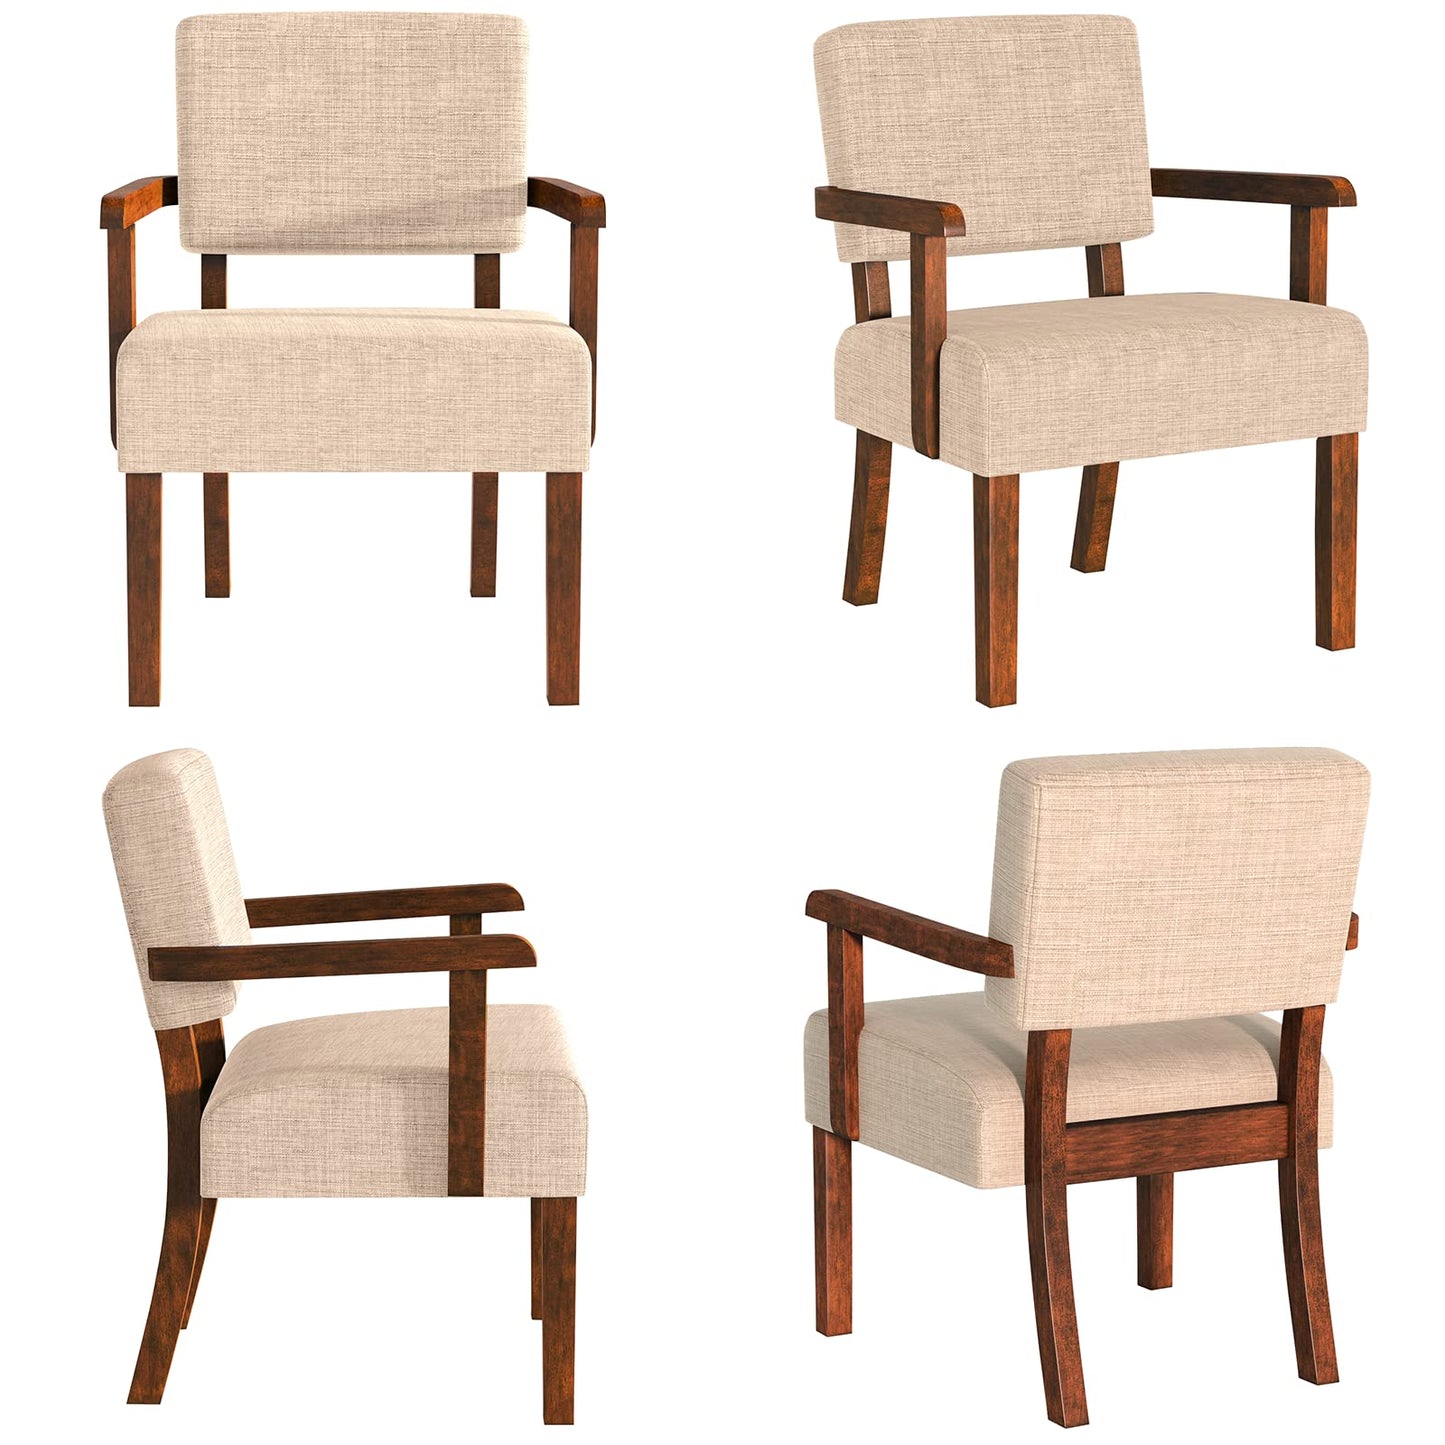 FAGAGA Accent Chair Set of 2 with Table, Living Room Chairs with Soft Seat and Armrests for Living Room Bedroom Reading Room Waiting Room (Beige) (AC01)